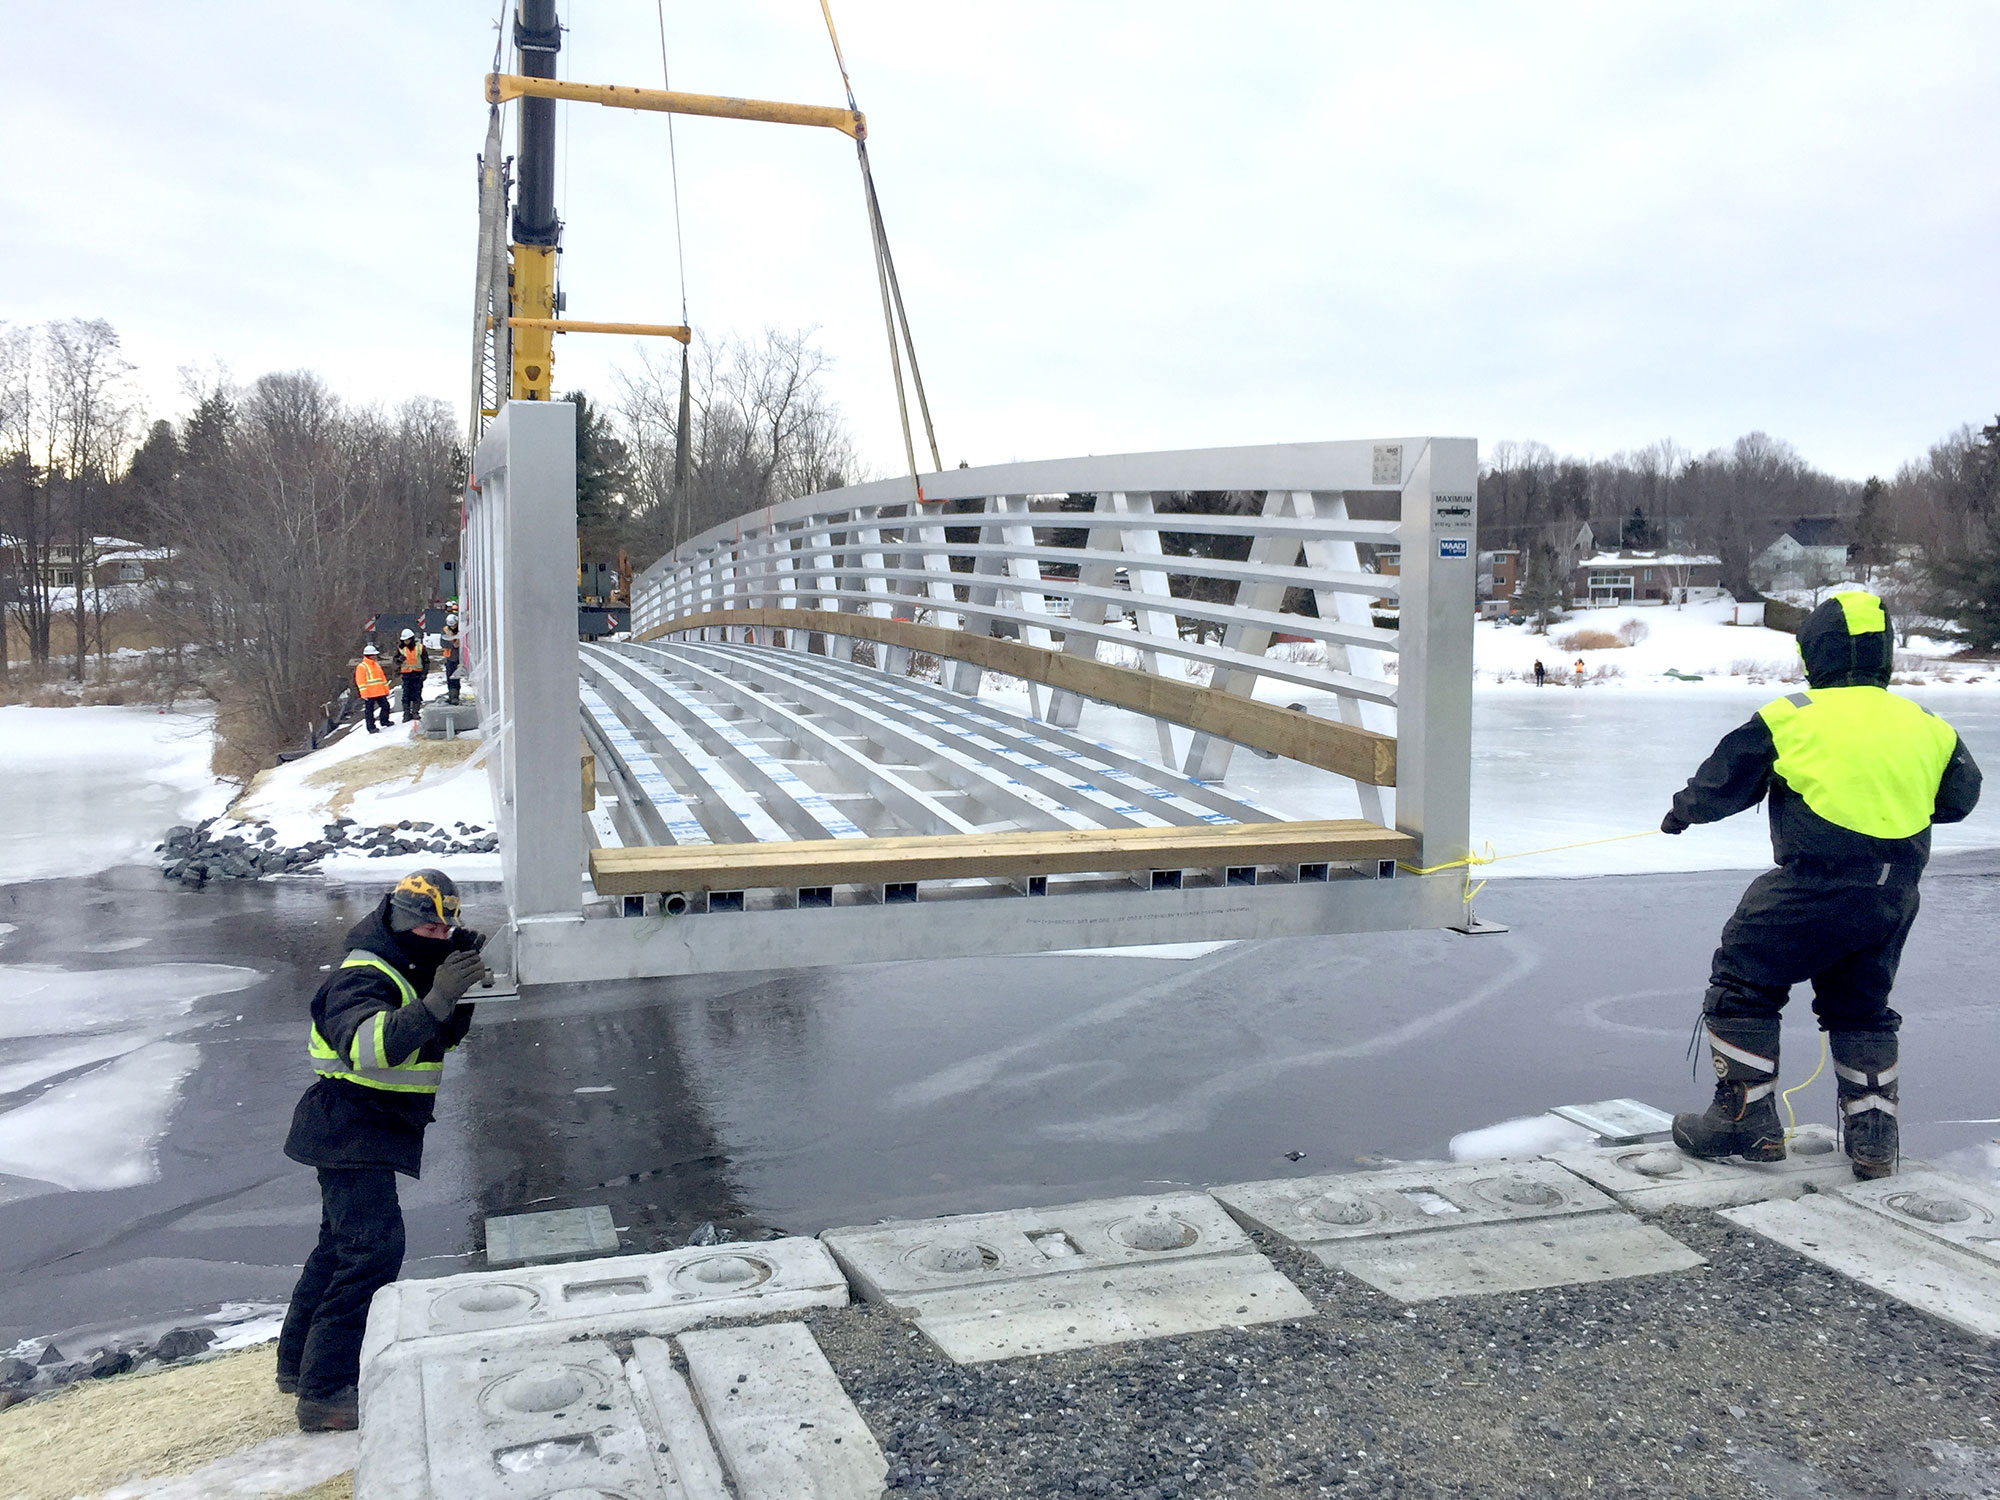 Prefabricated custom footbridge being lowered into place by crane in icy winter conditions